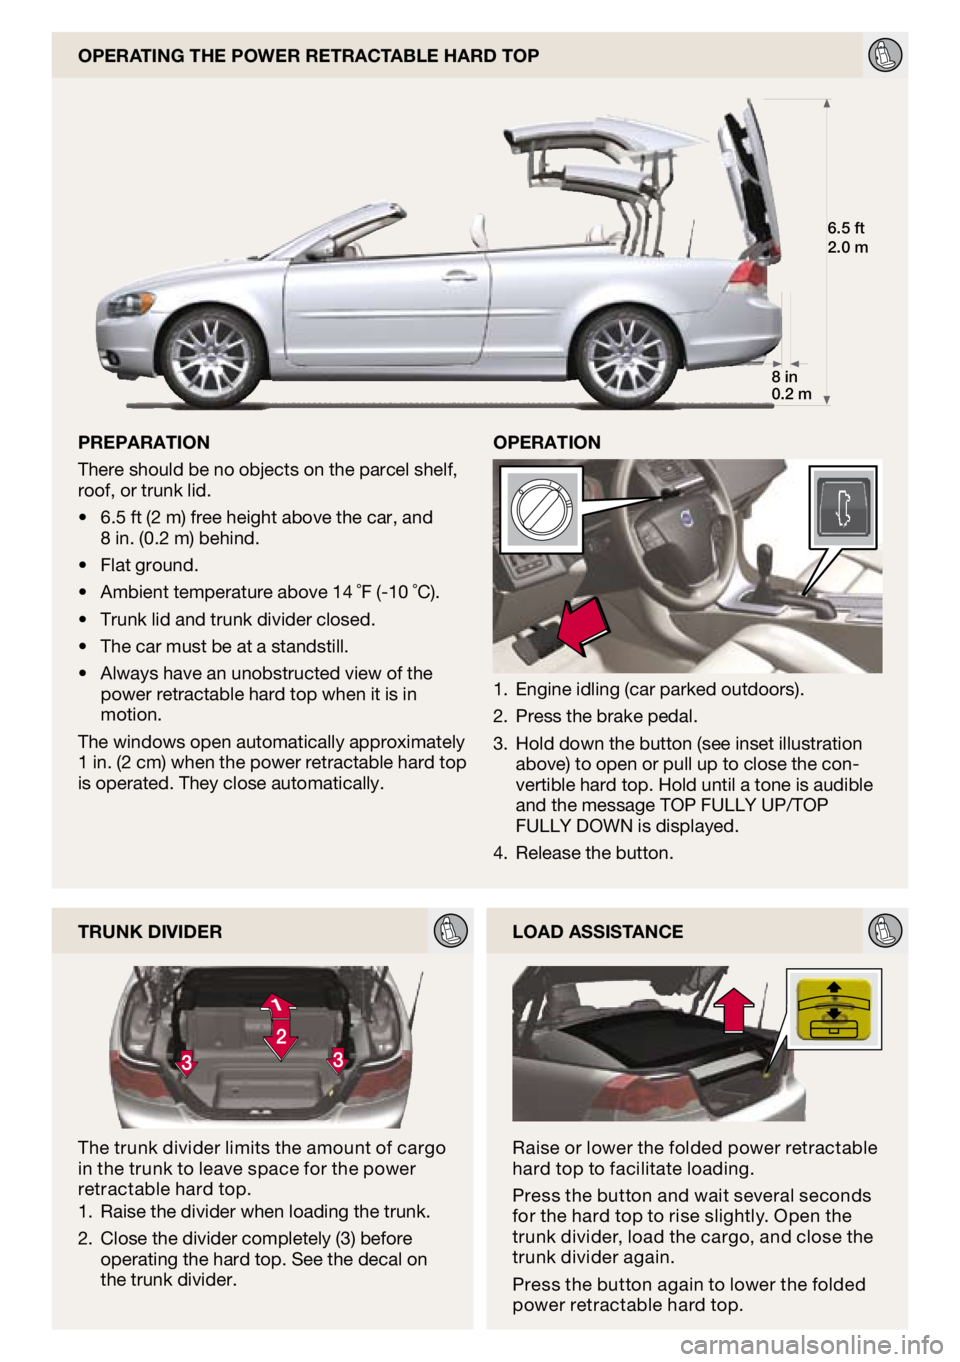 VOLVO C70 CONVERTIBLE 2009  Quick Guide 
6.5 ft2.0 m
8 in0.2 m

OPeRATIOn
OPeRATIng The POWeR ReTRAcTAble hARd TOP
PRePARATIOn
There should be no objects on the parcel shelf, roof, or trunk lid.
6.5 ft (2 m) free height above the car, and 8